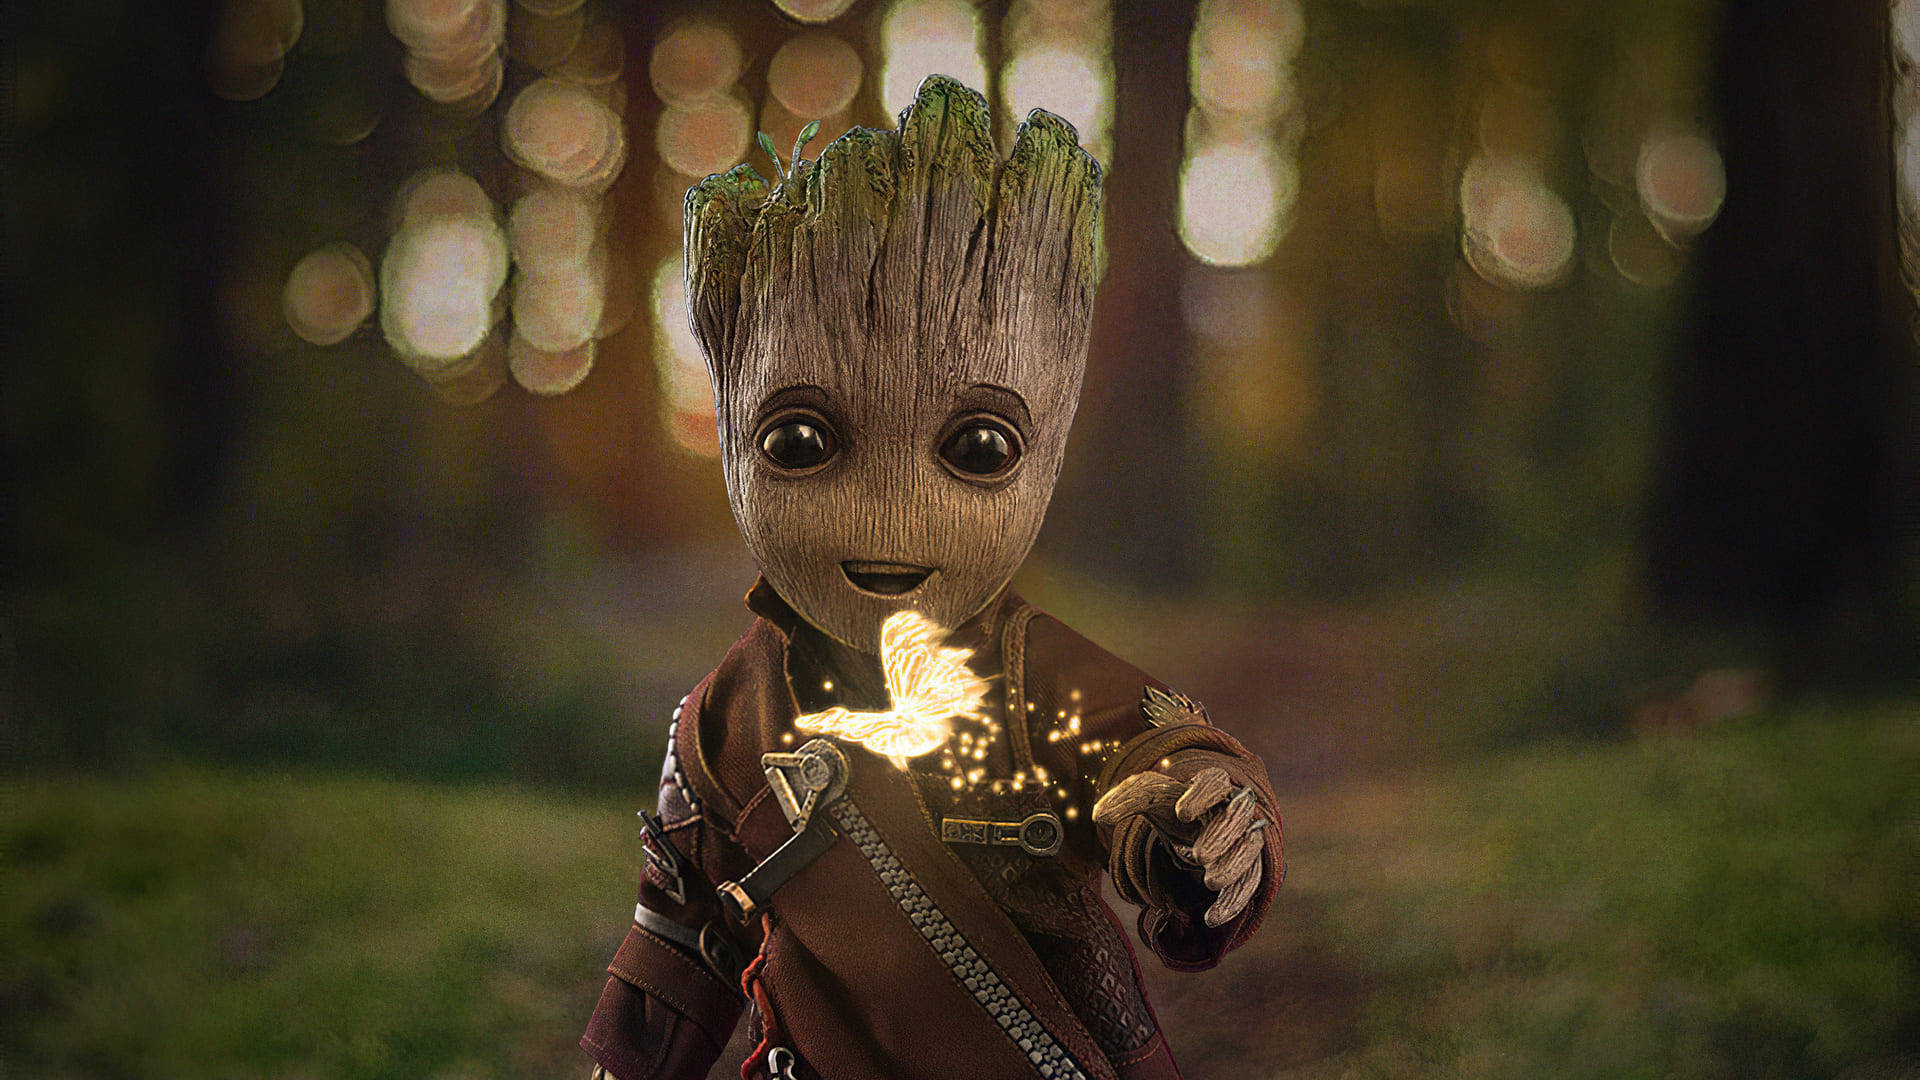 Cool Picture Of Baby Groot